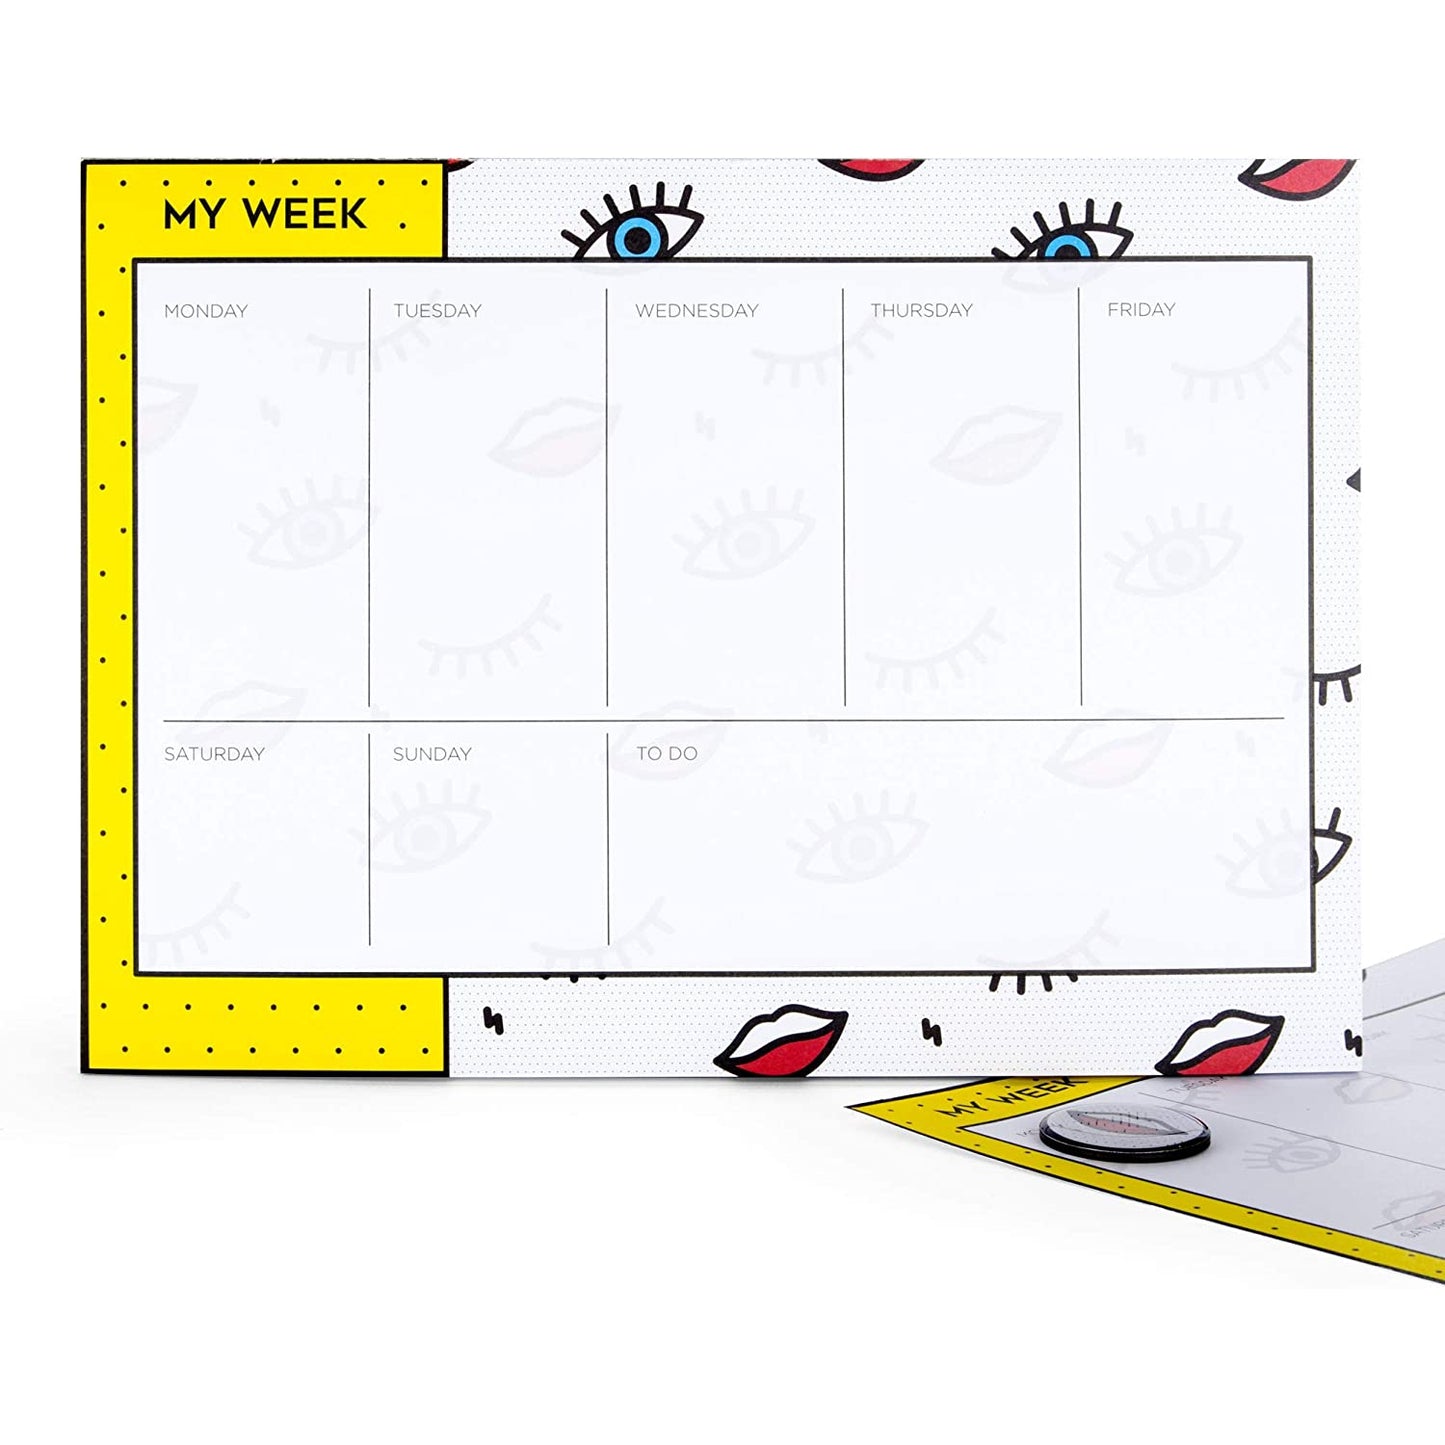 Wink Weekly Planner | 2 Magnets | Pop Art Eyes and Lips Print